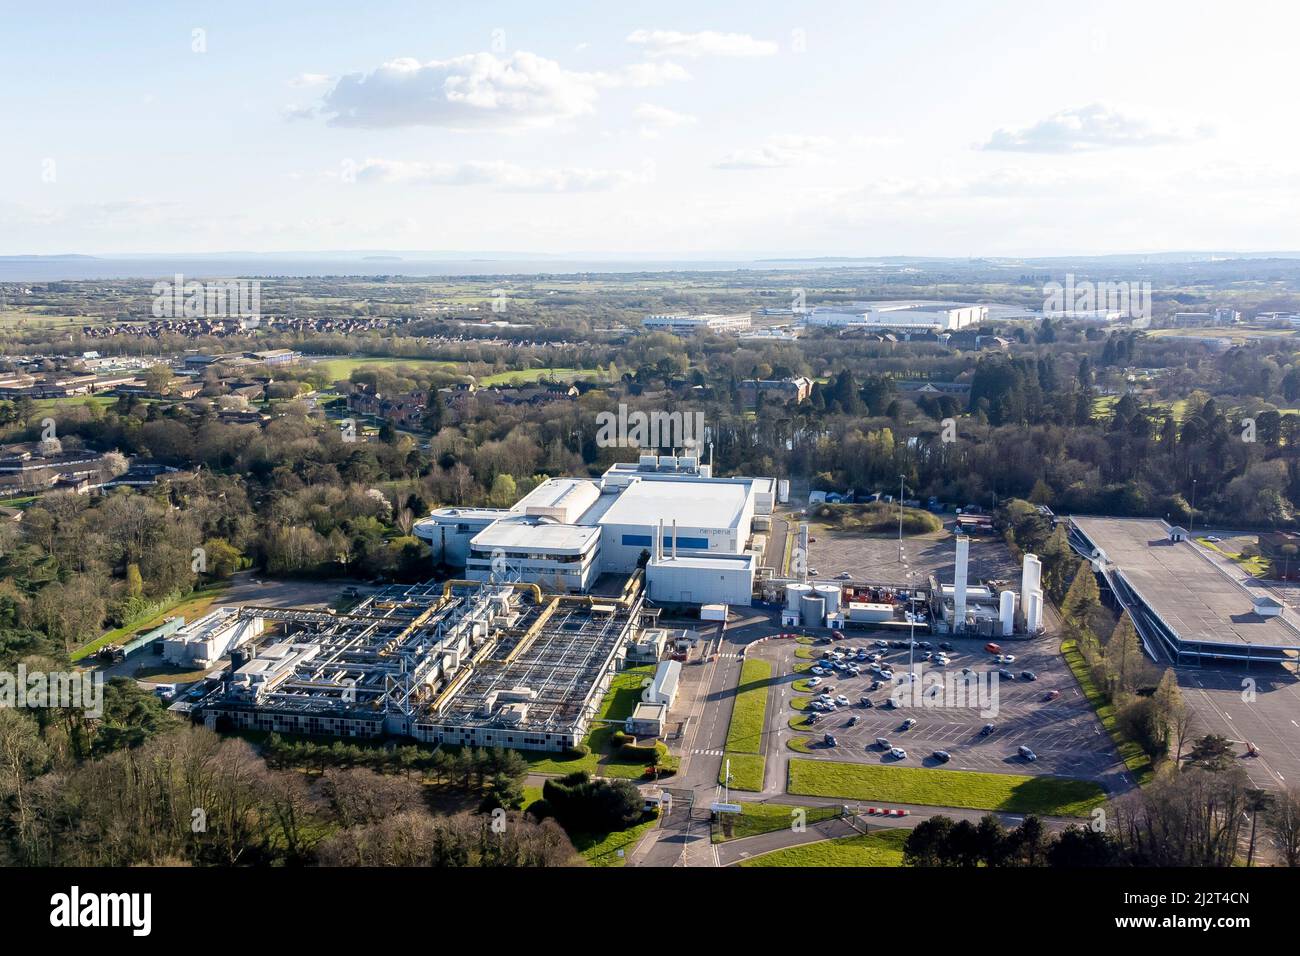 The Nexperia plant in Newport, Wales. Nexperia, a Dutch subsidiary of the Chinese technology company Wingtech, acquired the Newport Wafer Fab in July 2021 for £63m however the UK Government may still decide to intervene under the National Security and Investment Act. The plant, which makes semiconductors, employs 450 people. Stock Photo